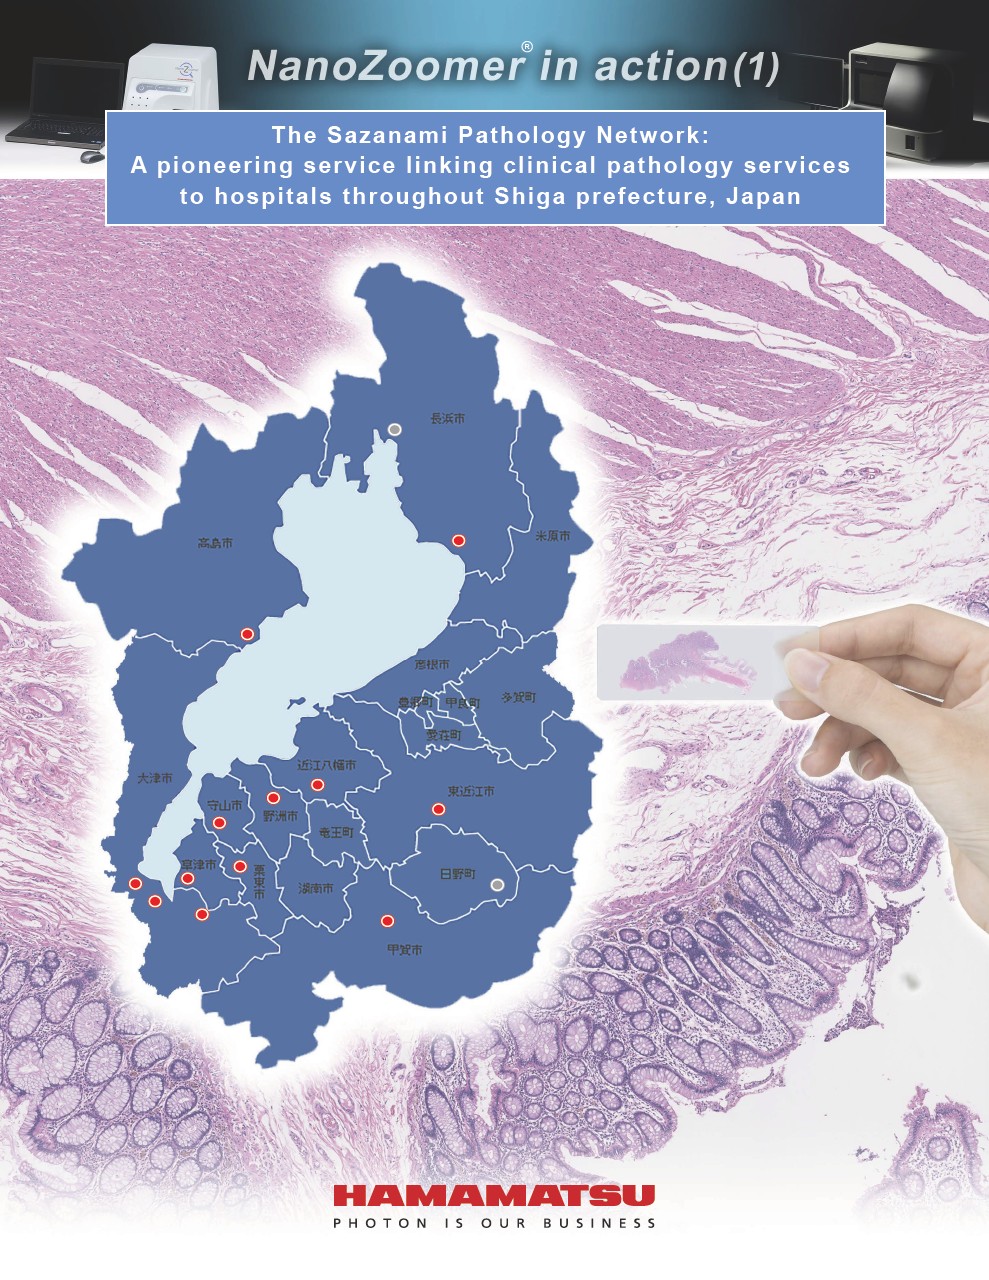 NanoZoomer in action (1) The Sazanami Pathology Network: A pioneering service linking clinical pathology services  to hospitals throughout Shiga prefecture, Japan